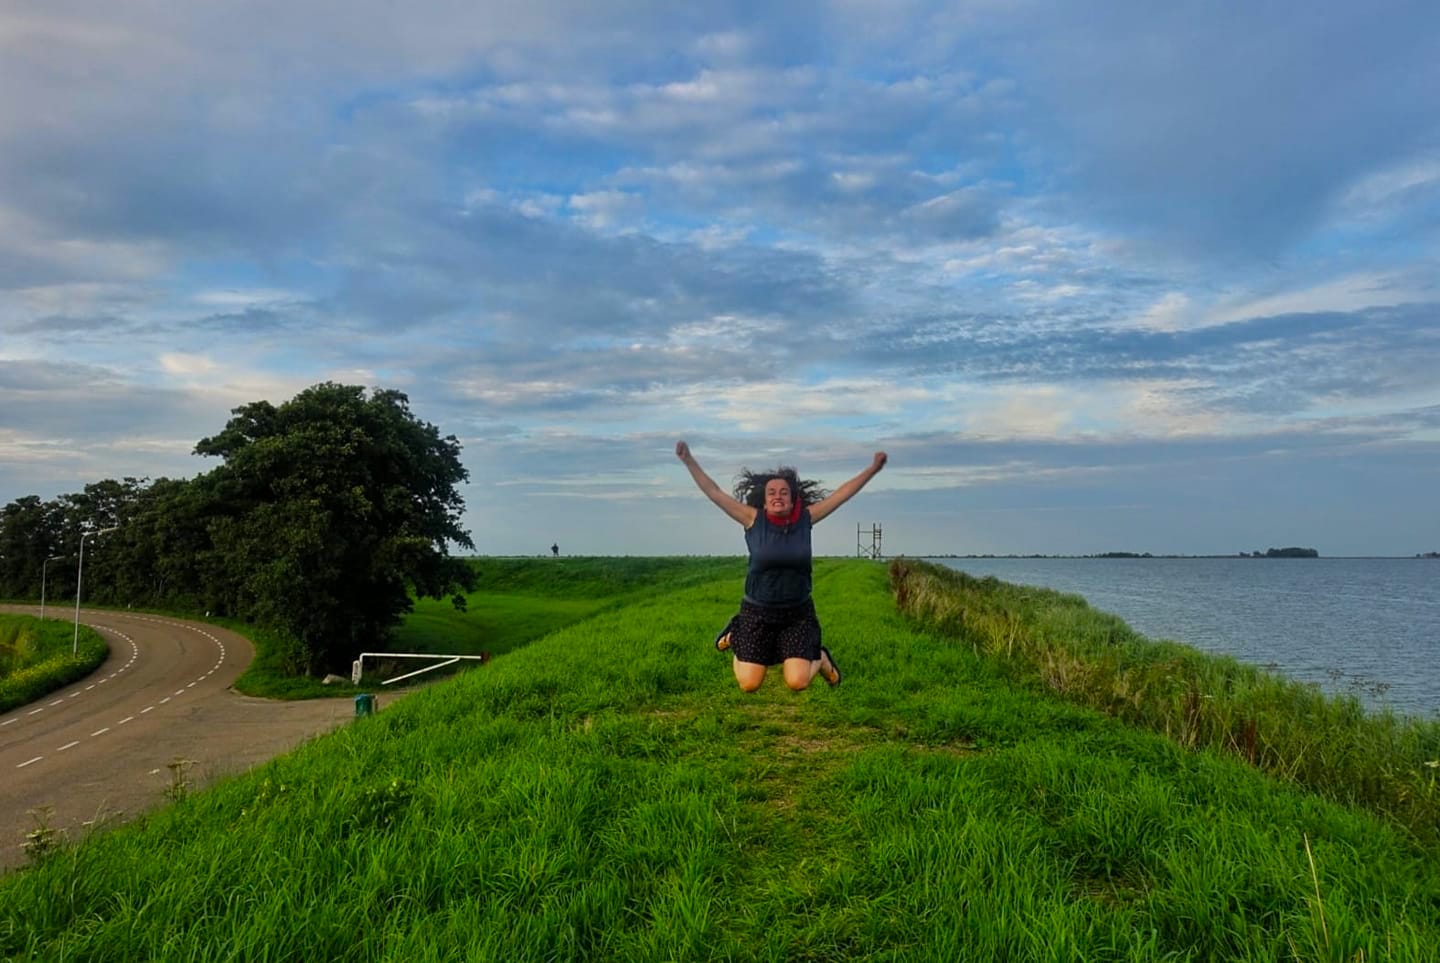 Pilar jumping at the dam in Katwoude, Amsterdam, The Netherlands countryside